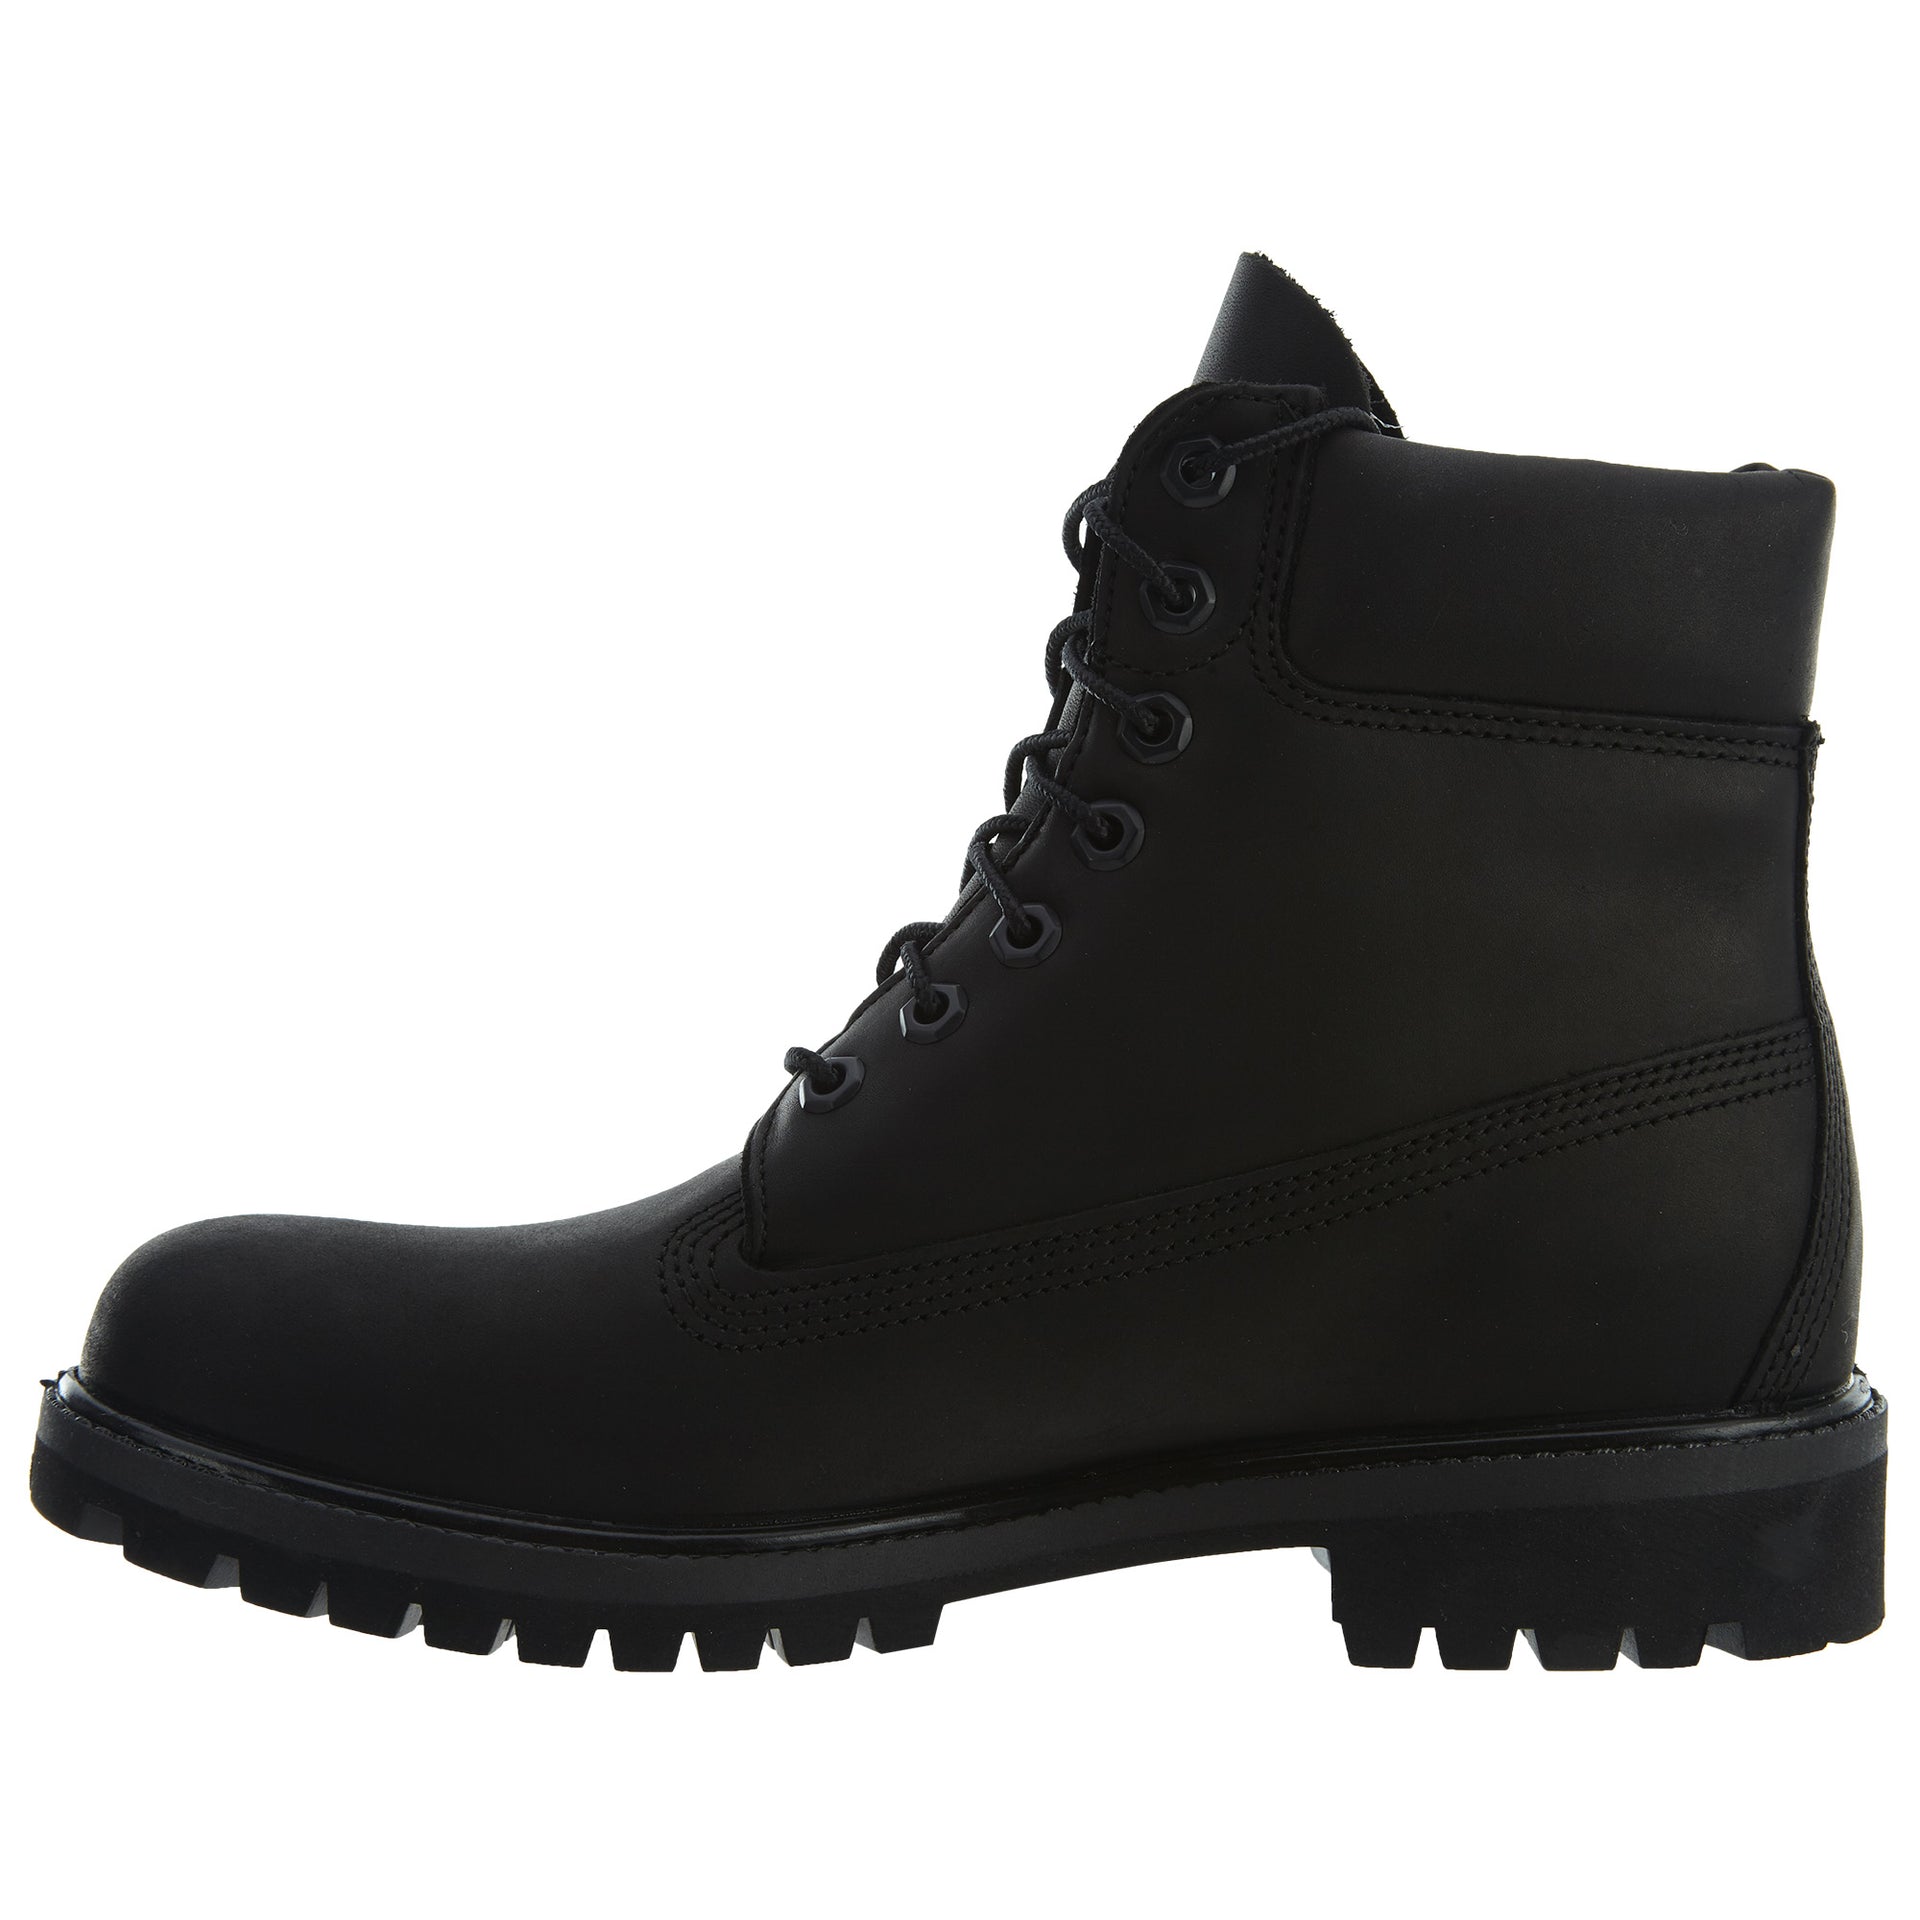 Timberland 6" Premium Boot Mens Style : Tb0a1ma6